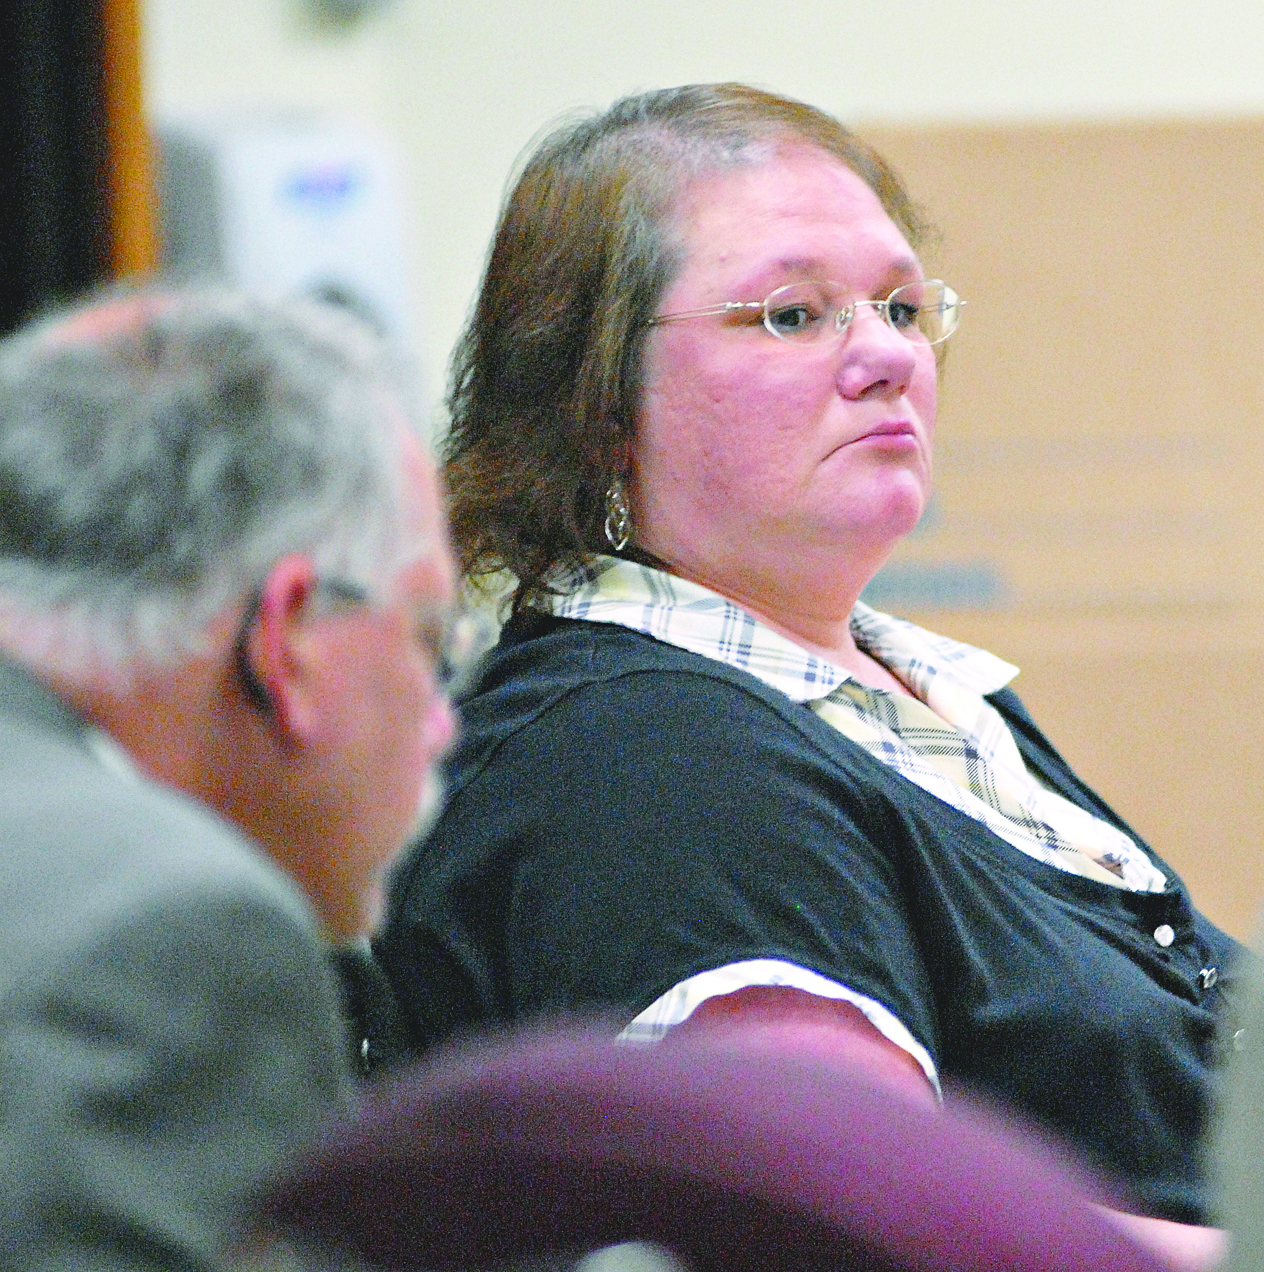 Catherine Betts was sentenced in 2011 for embezzling almost $800